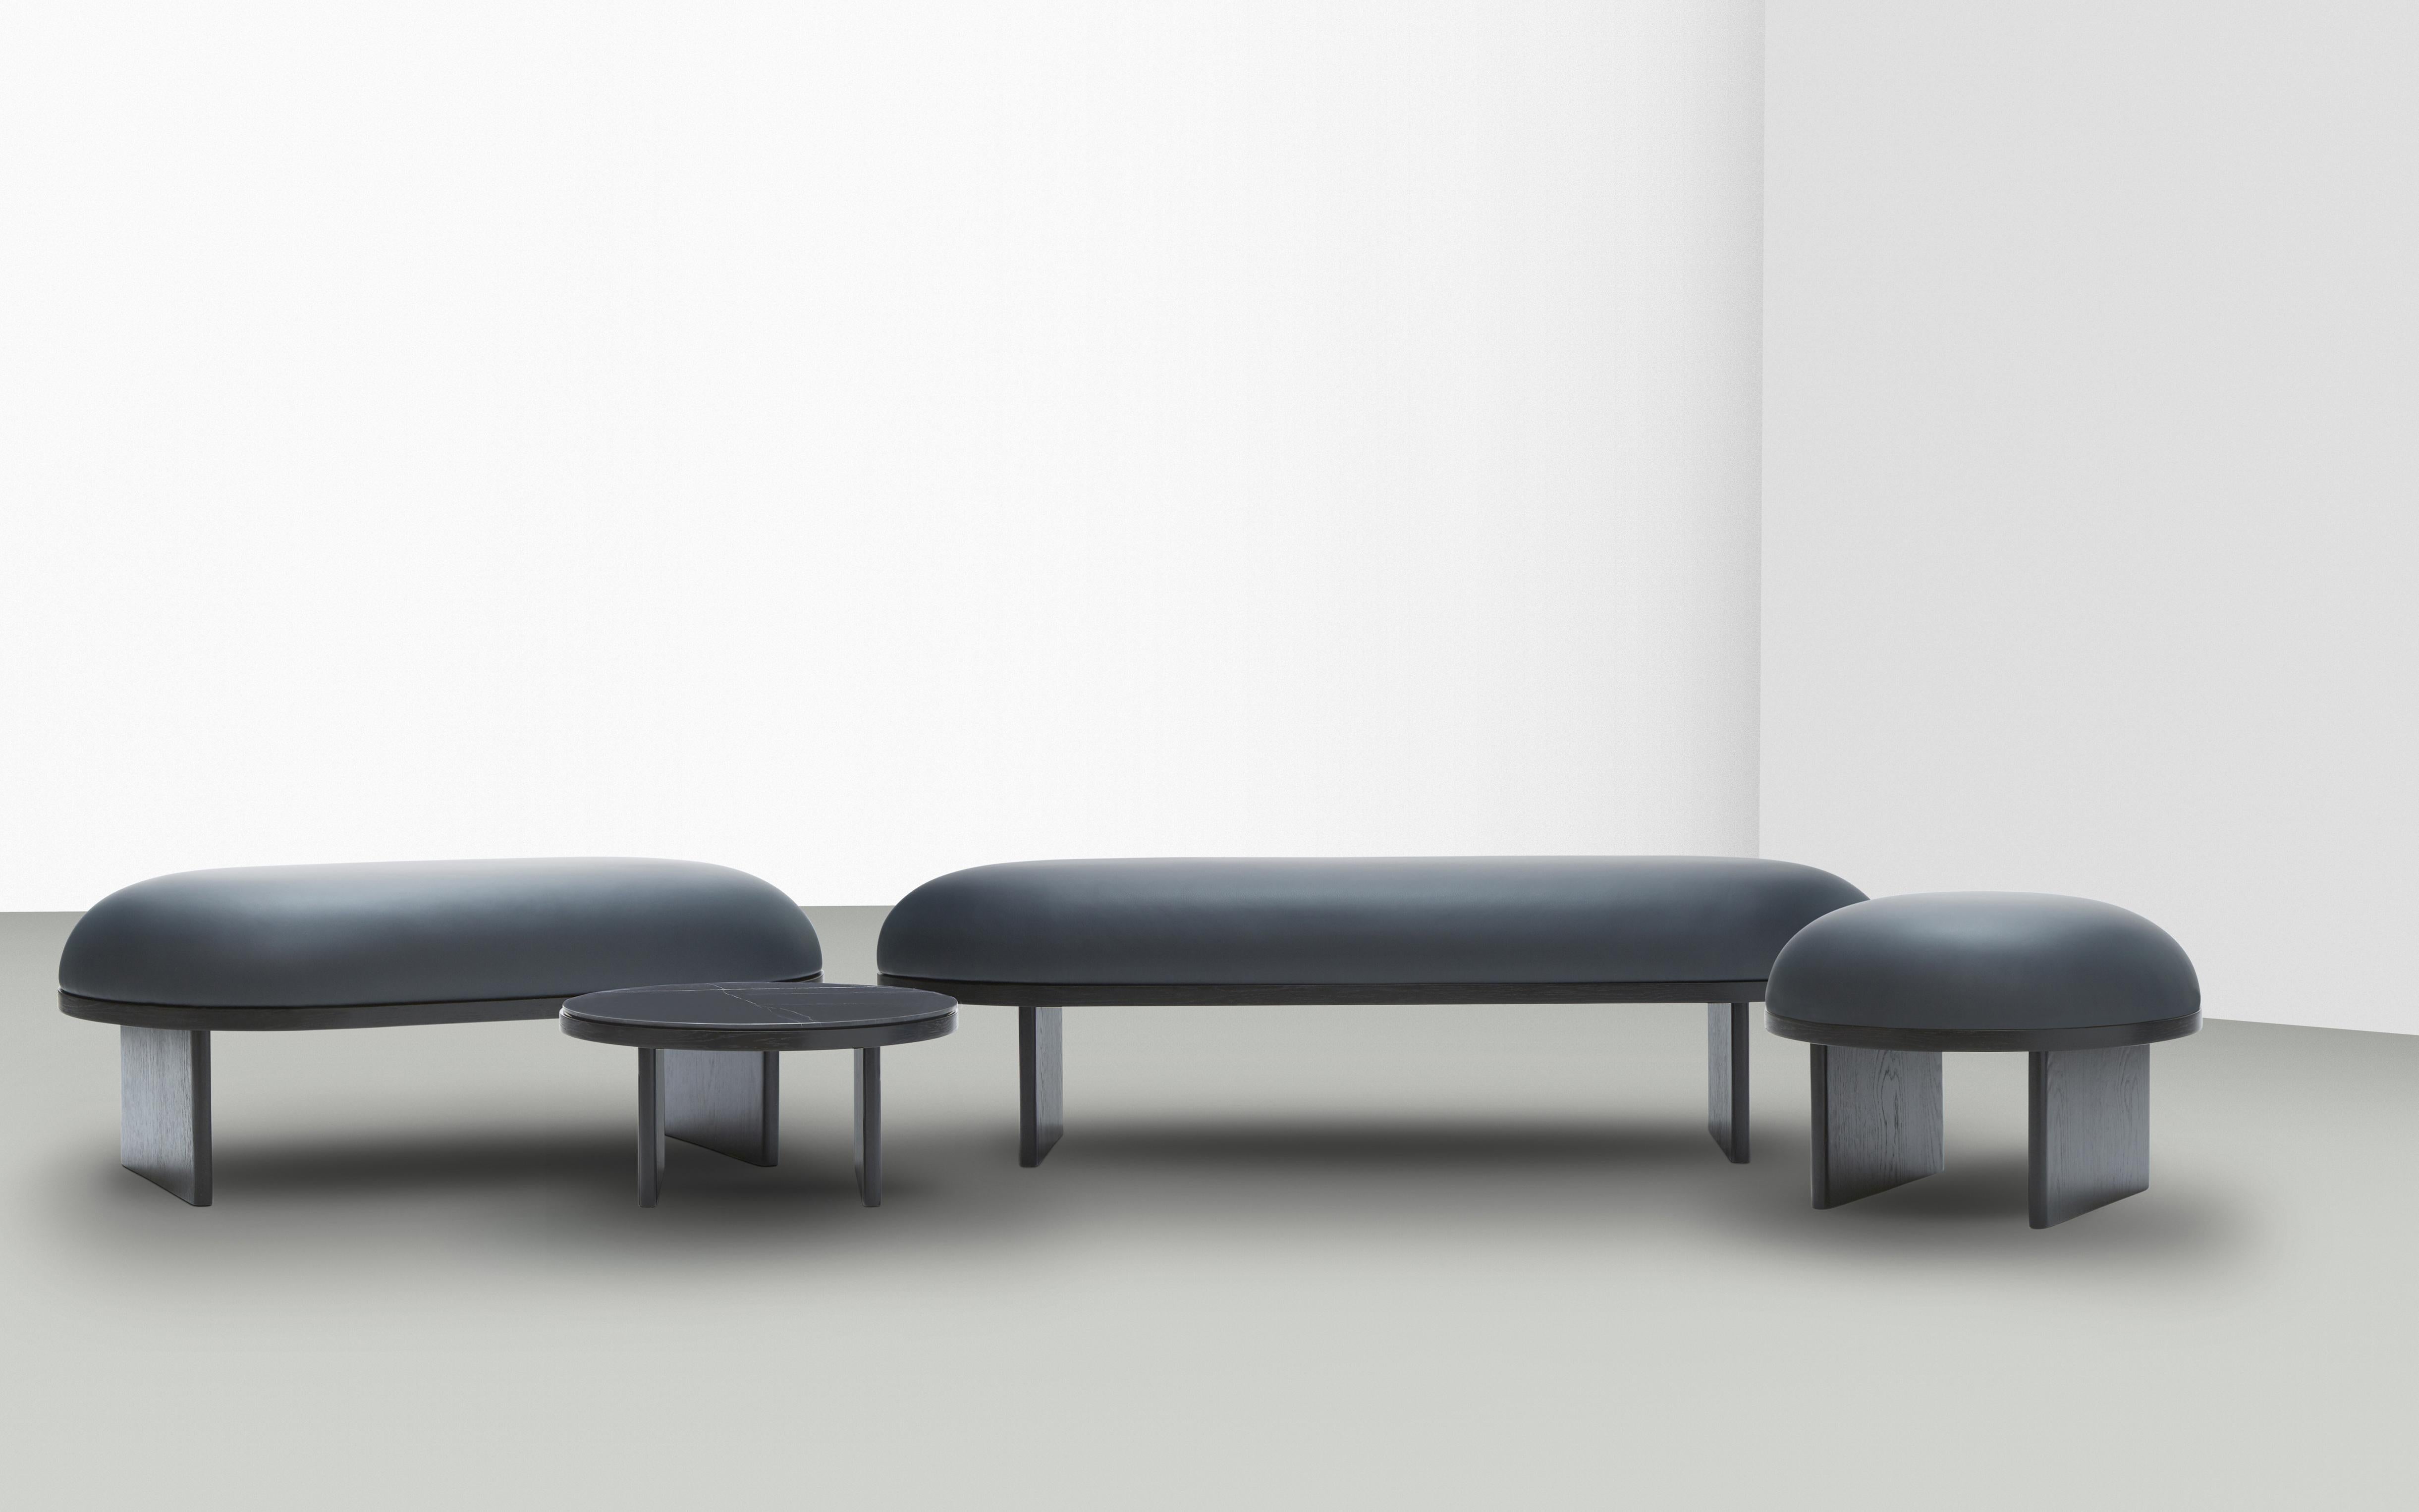 Anza Large Upholstered Bench with Floating Cushion (Banc tapissé avec coussin flottant) Neuf - En vente à Brooklyn, NY